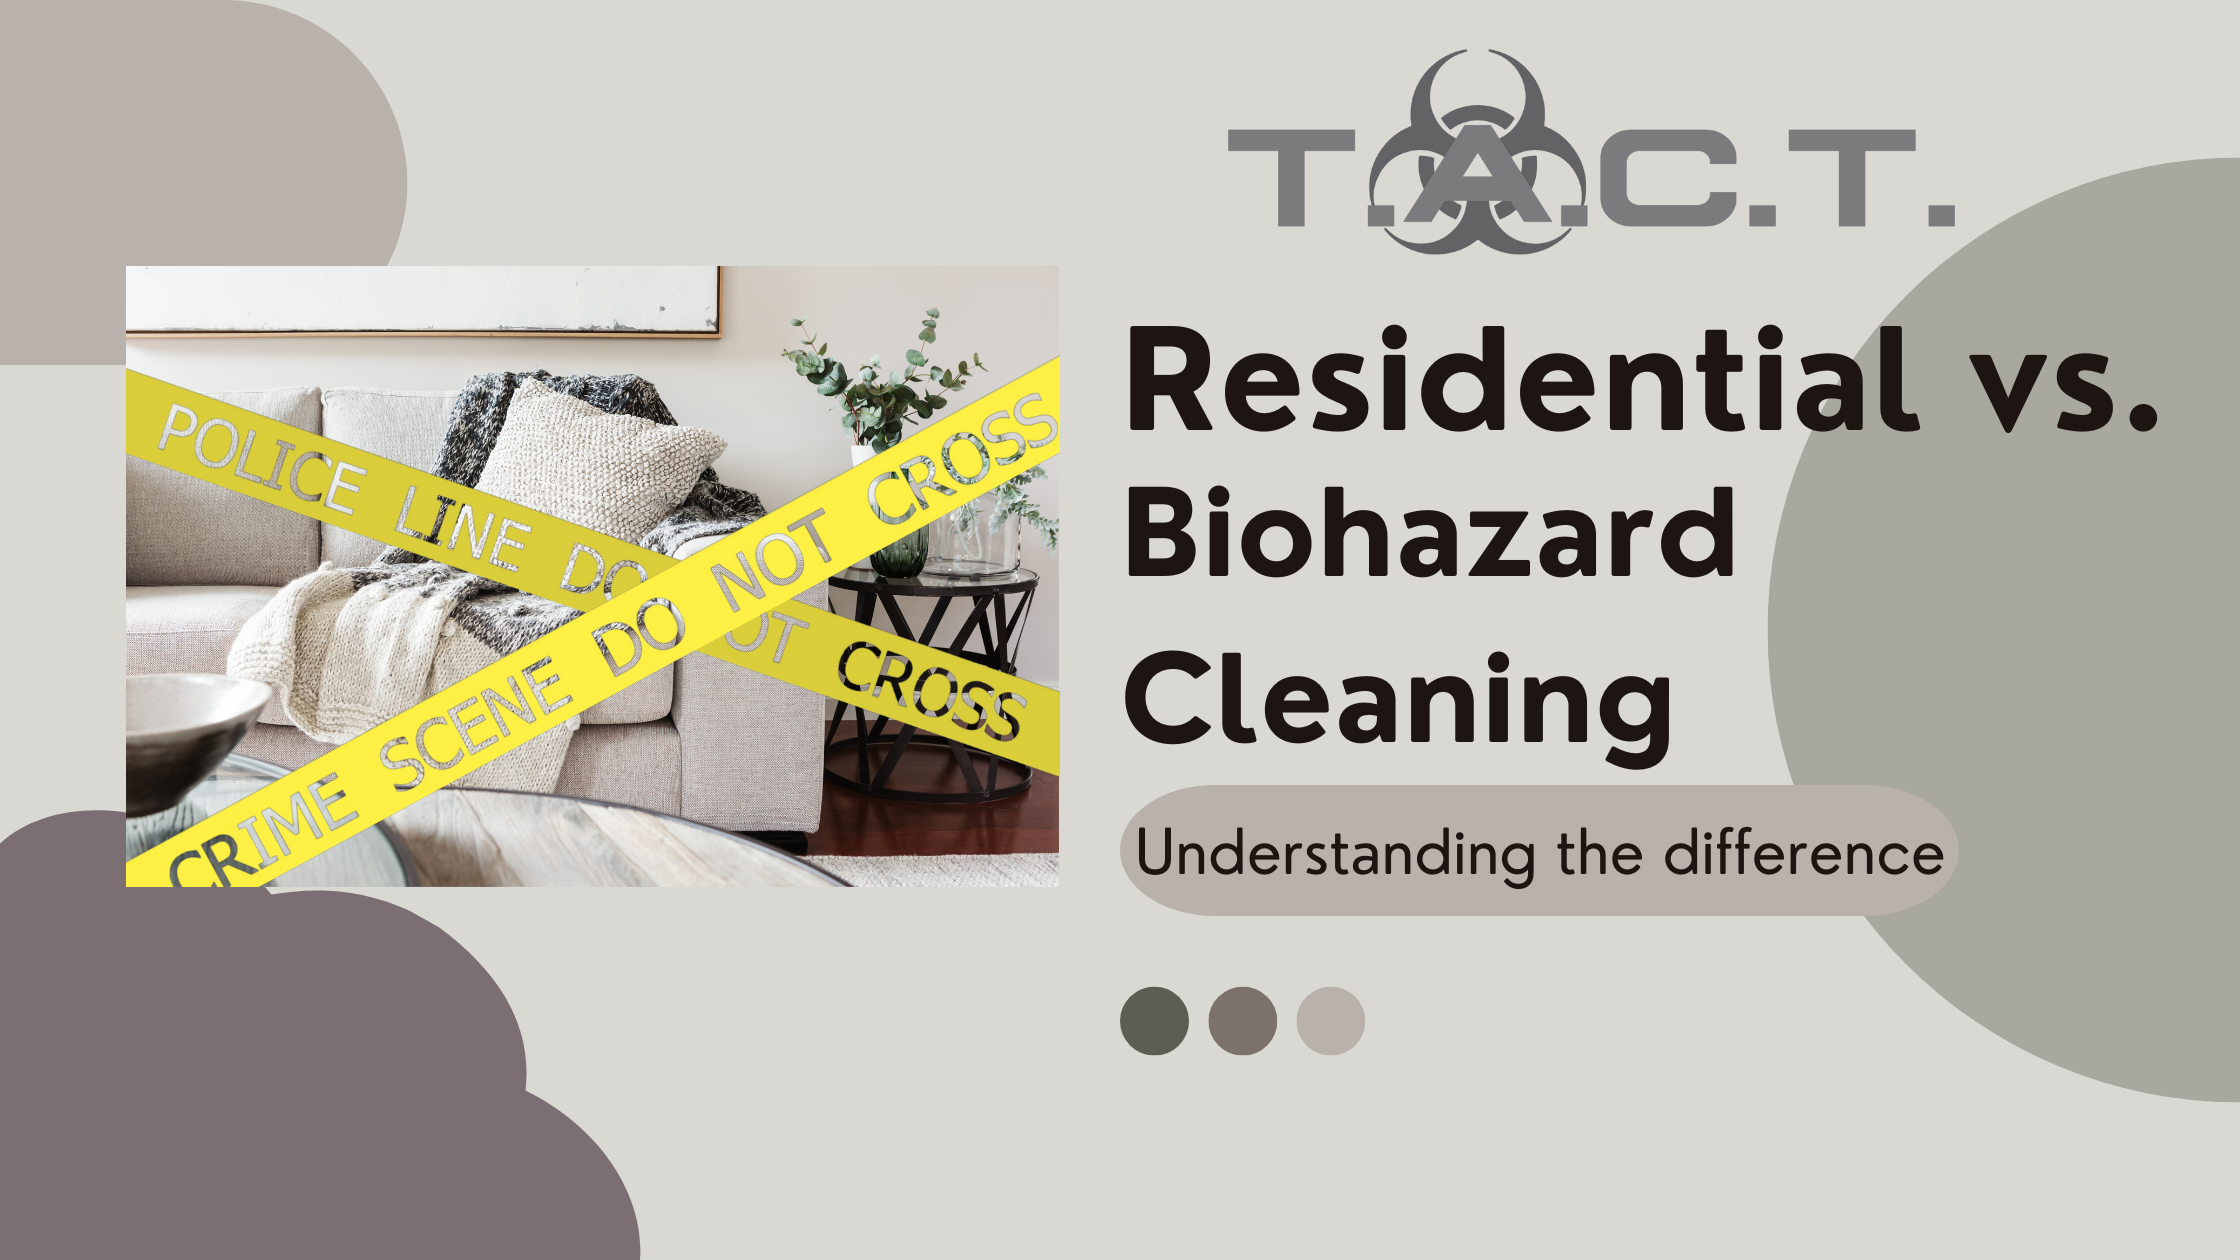 Residential Cleaning vs Biohazard Cleaning: Which is Right for Your Home?